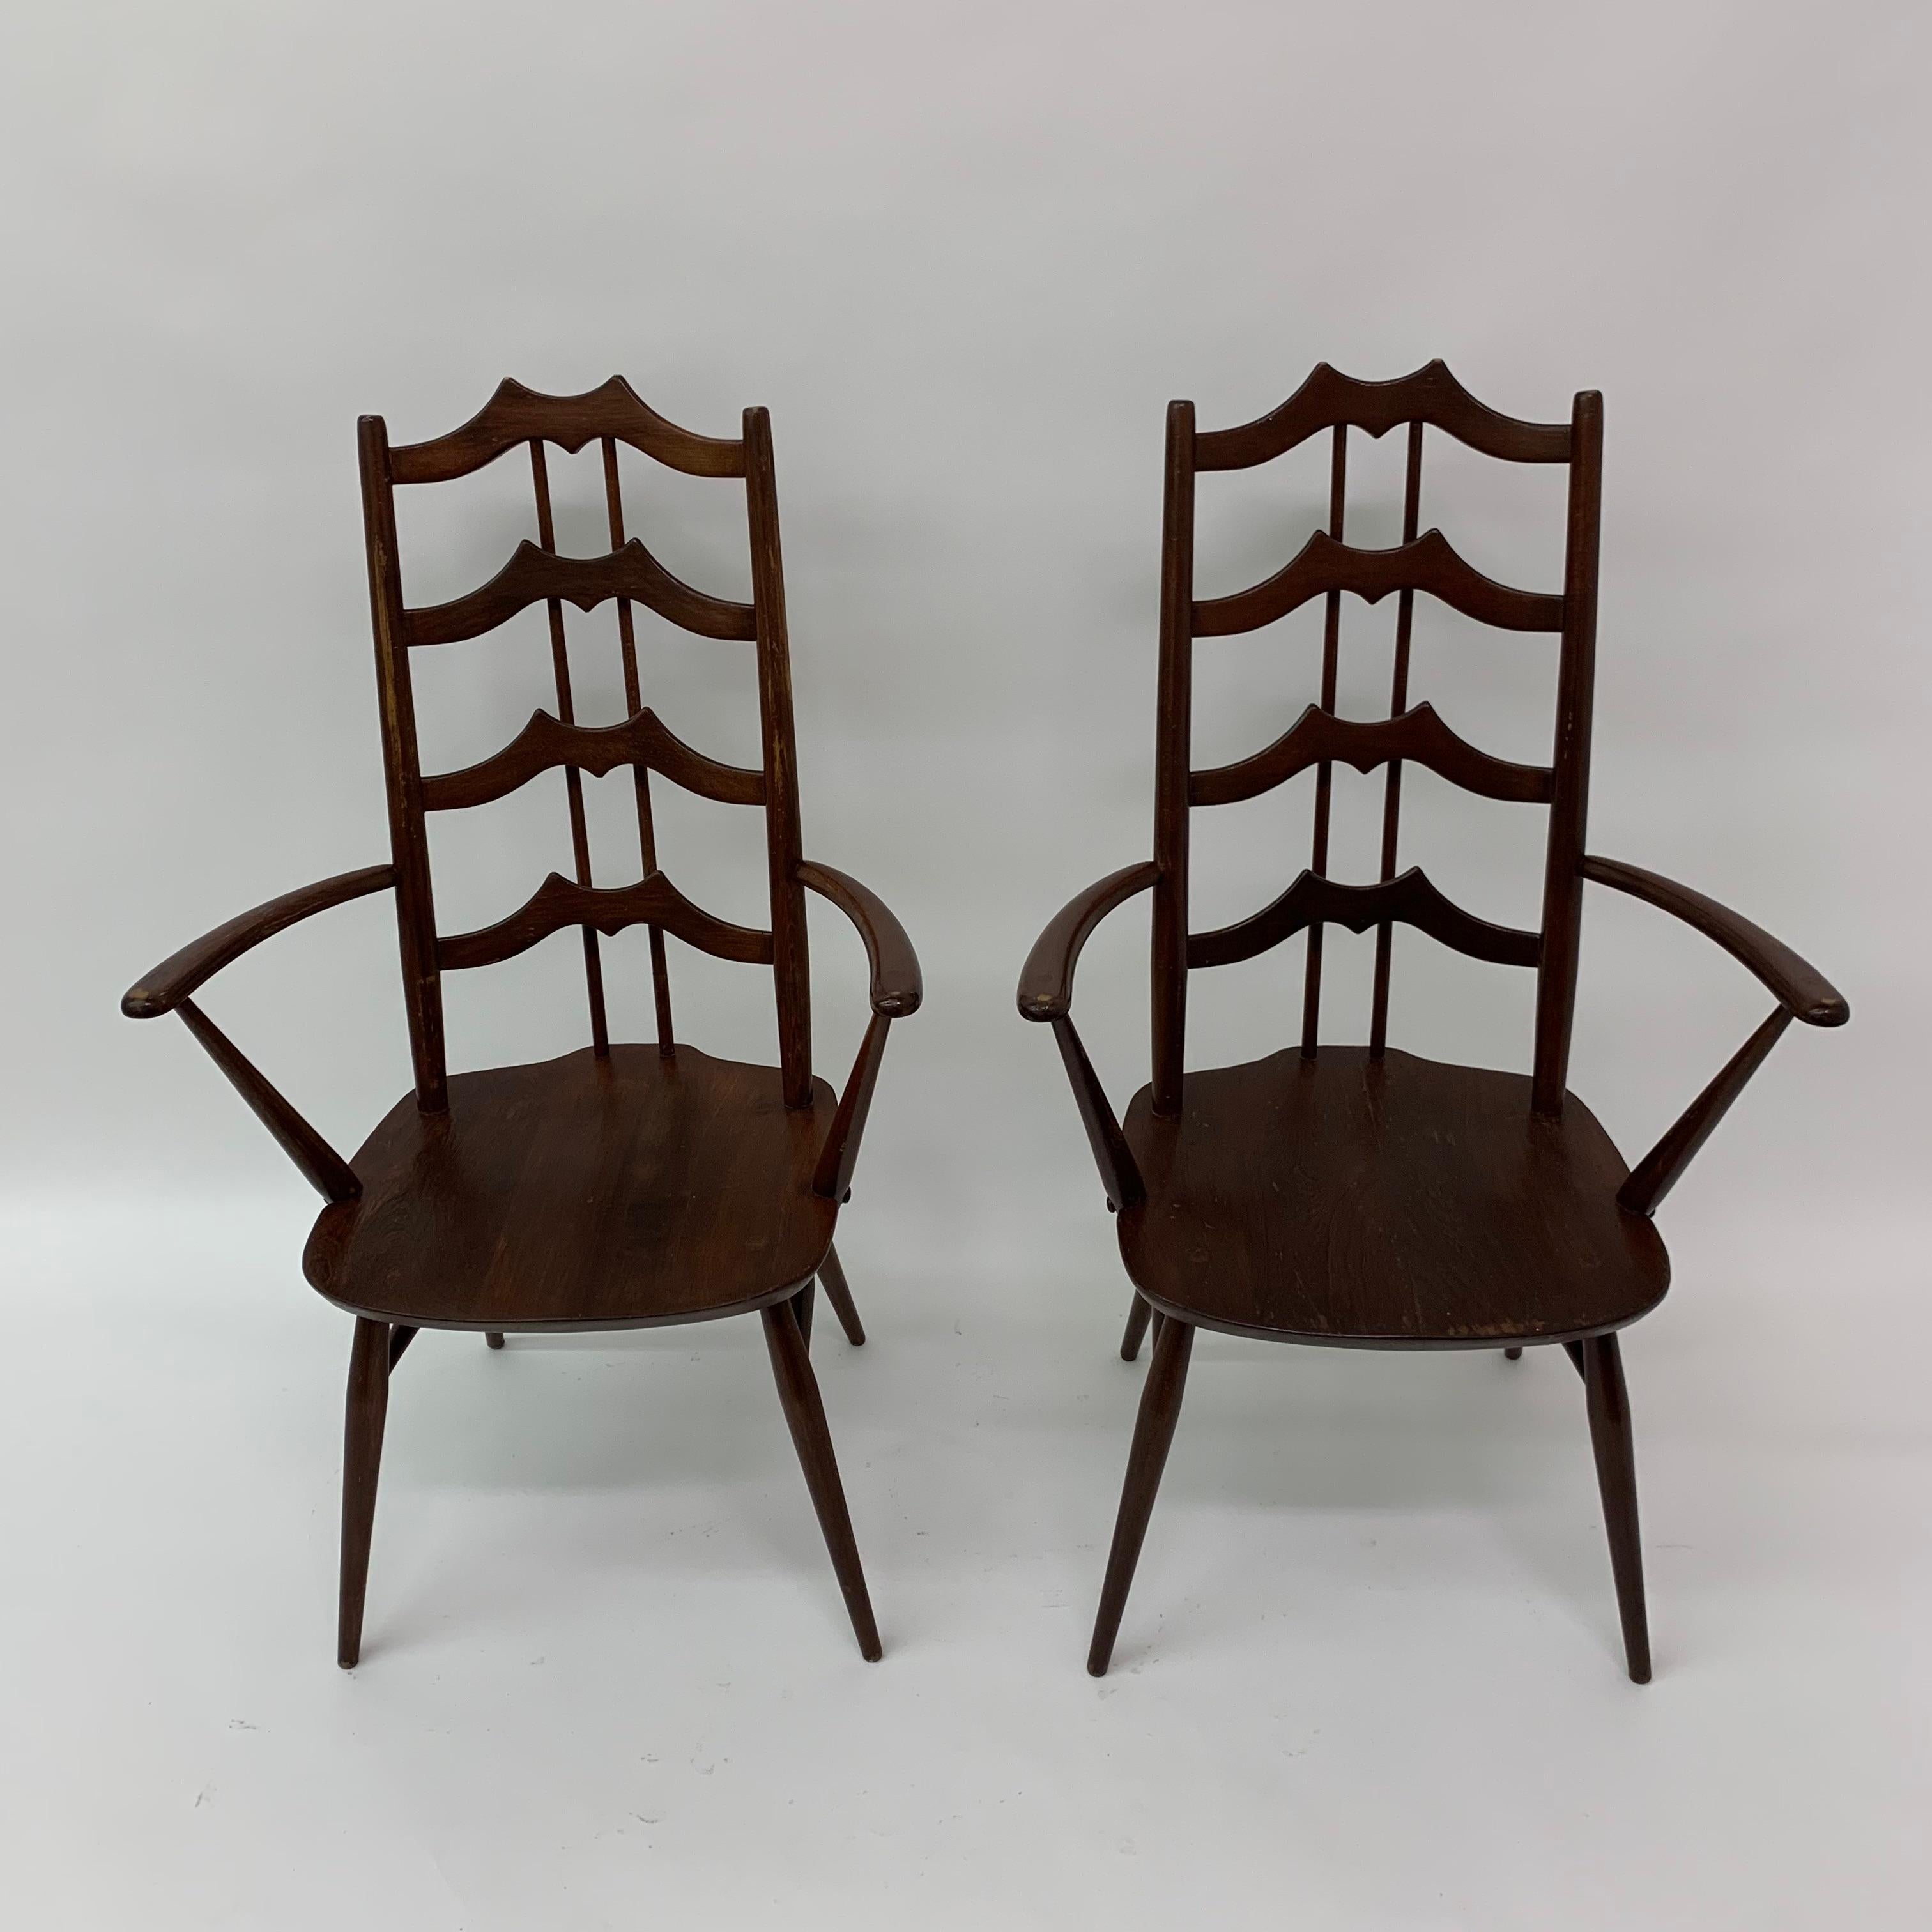 English Set of 2 arm chairs by  Lucian Randolph Ercolani for Ercol , 1950’s For Sale